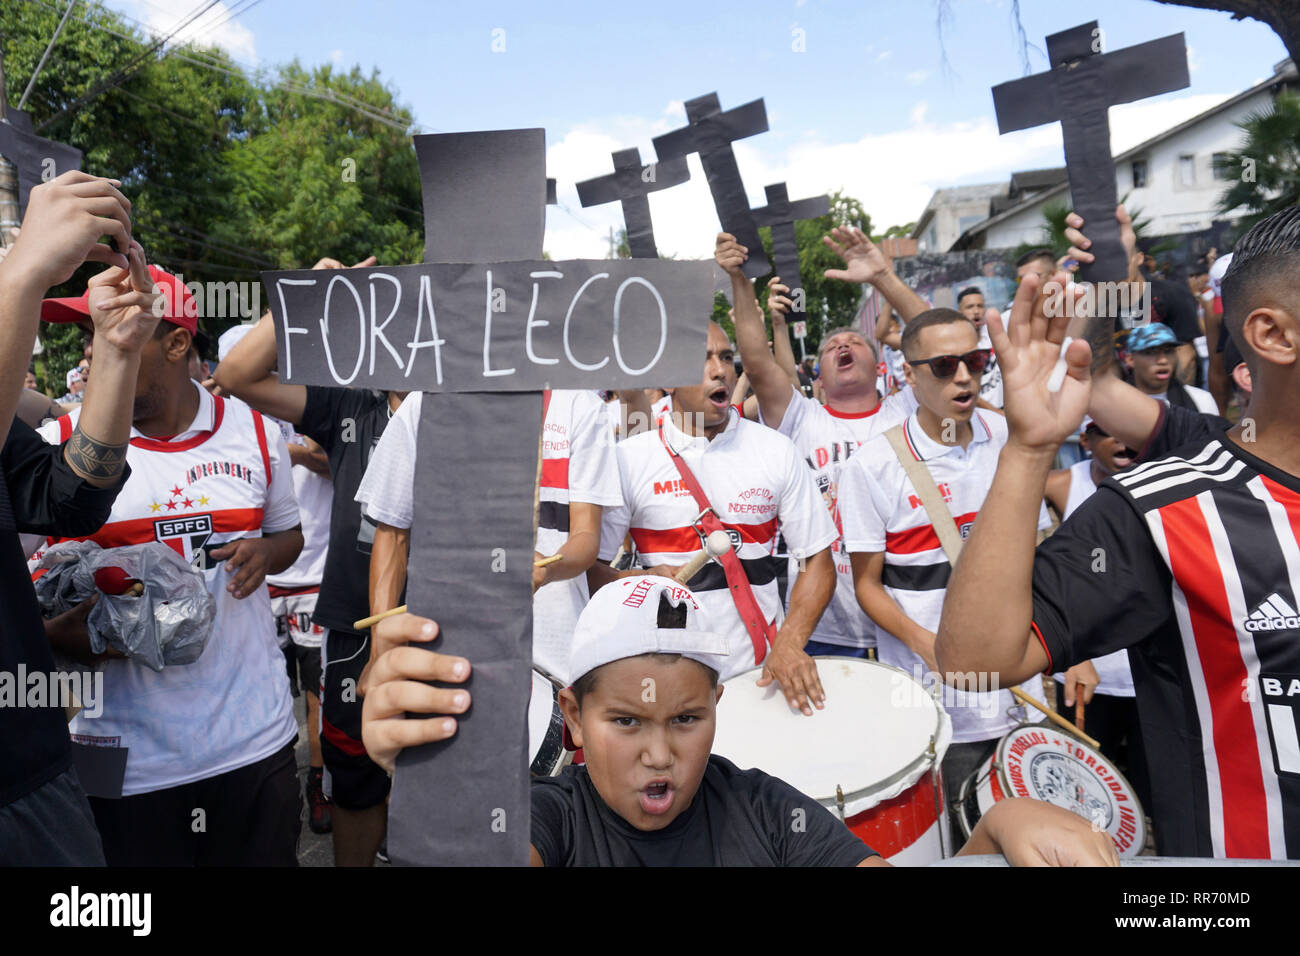 February 24, 2019 - SÃ£O Paulo, SÃ£o Paulo, Brazil - SÃ£o Paulo (SP), 24/02/2019 -SÃƒO PAULO FC X RB BRAZIL - SÃ£o Paulo FC fan protests before the match between SÃ£o Paulo FC vs. RB Brasil, valid for the 8th round of the 2019 Paulista Championship, held at the Morumbi Stadium in SÃ£o Paulo, SP. Credit: Cris Faga/ZUMA Wire/Alamy Live News Stock Photo